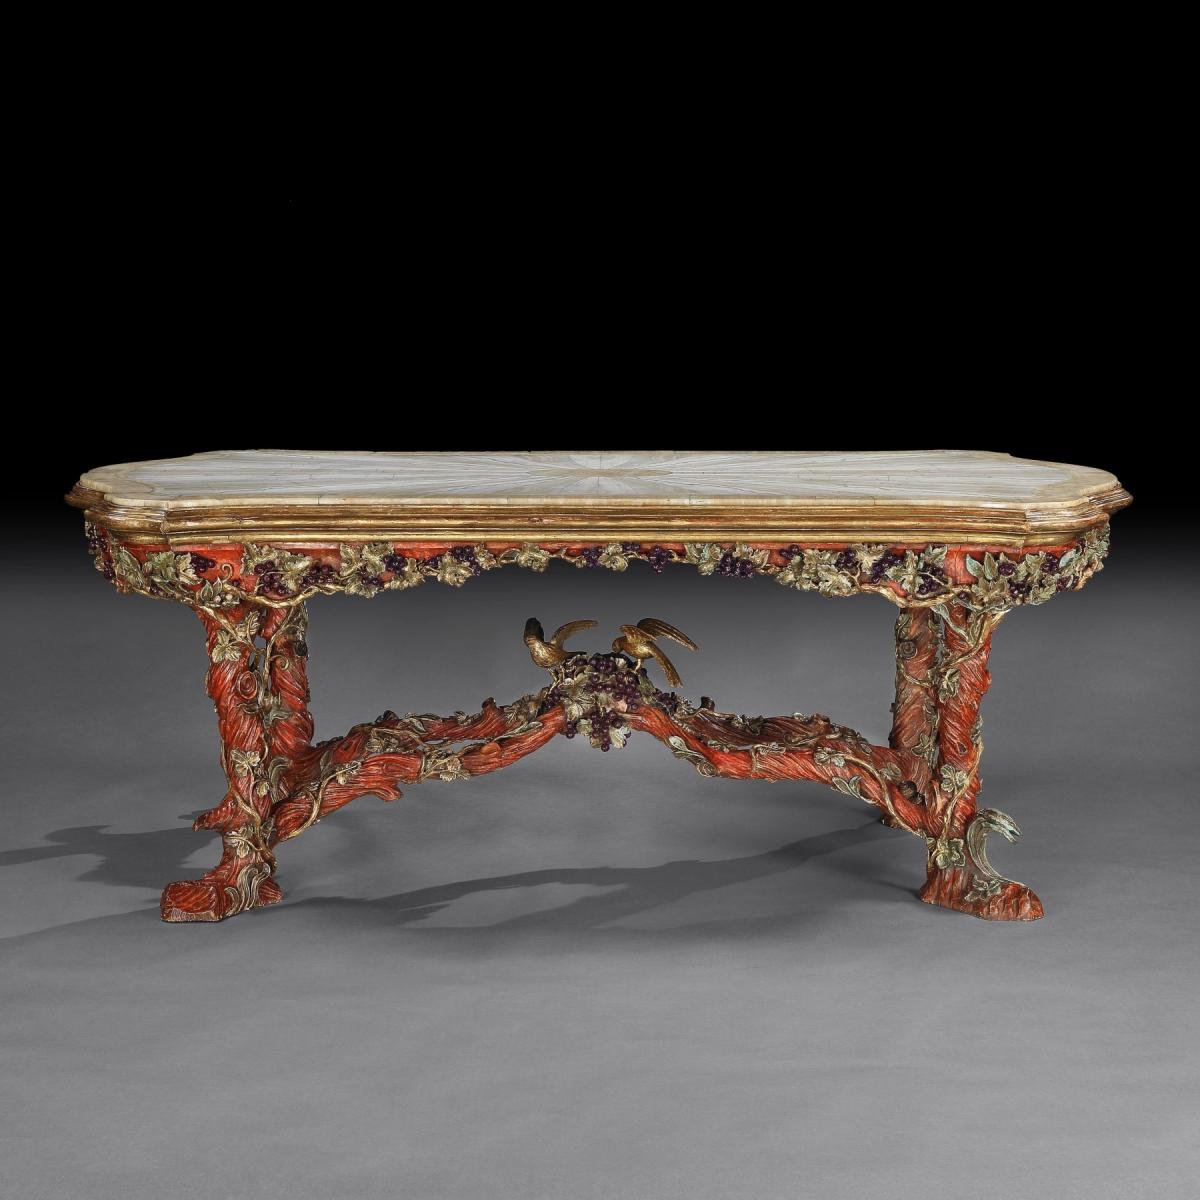 Outstanding Italian Carved Wood Polychrome Centre Table With Onyx Top By Amulet Bertoni